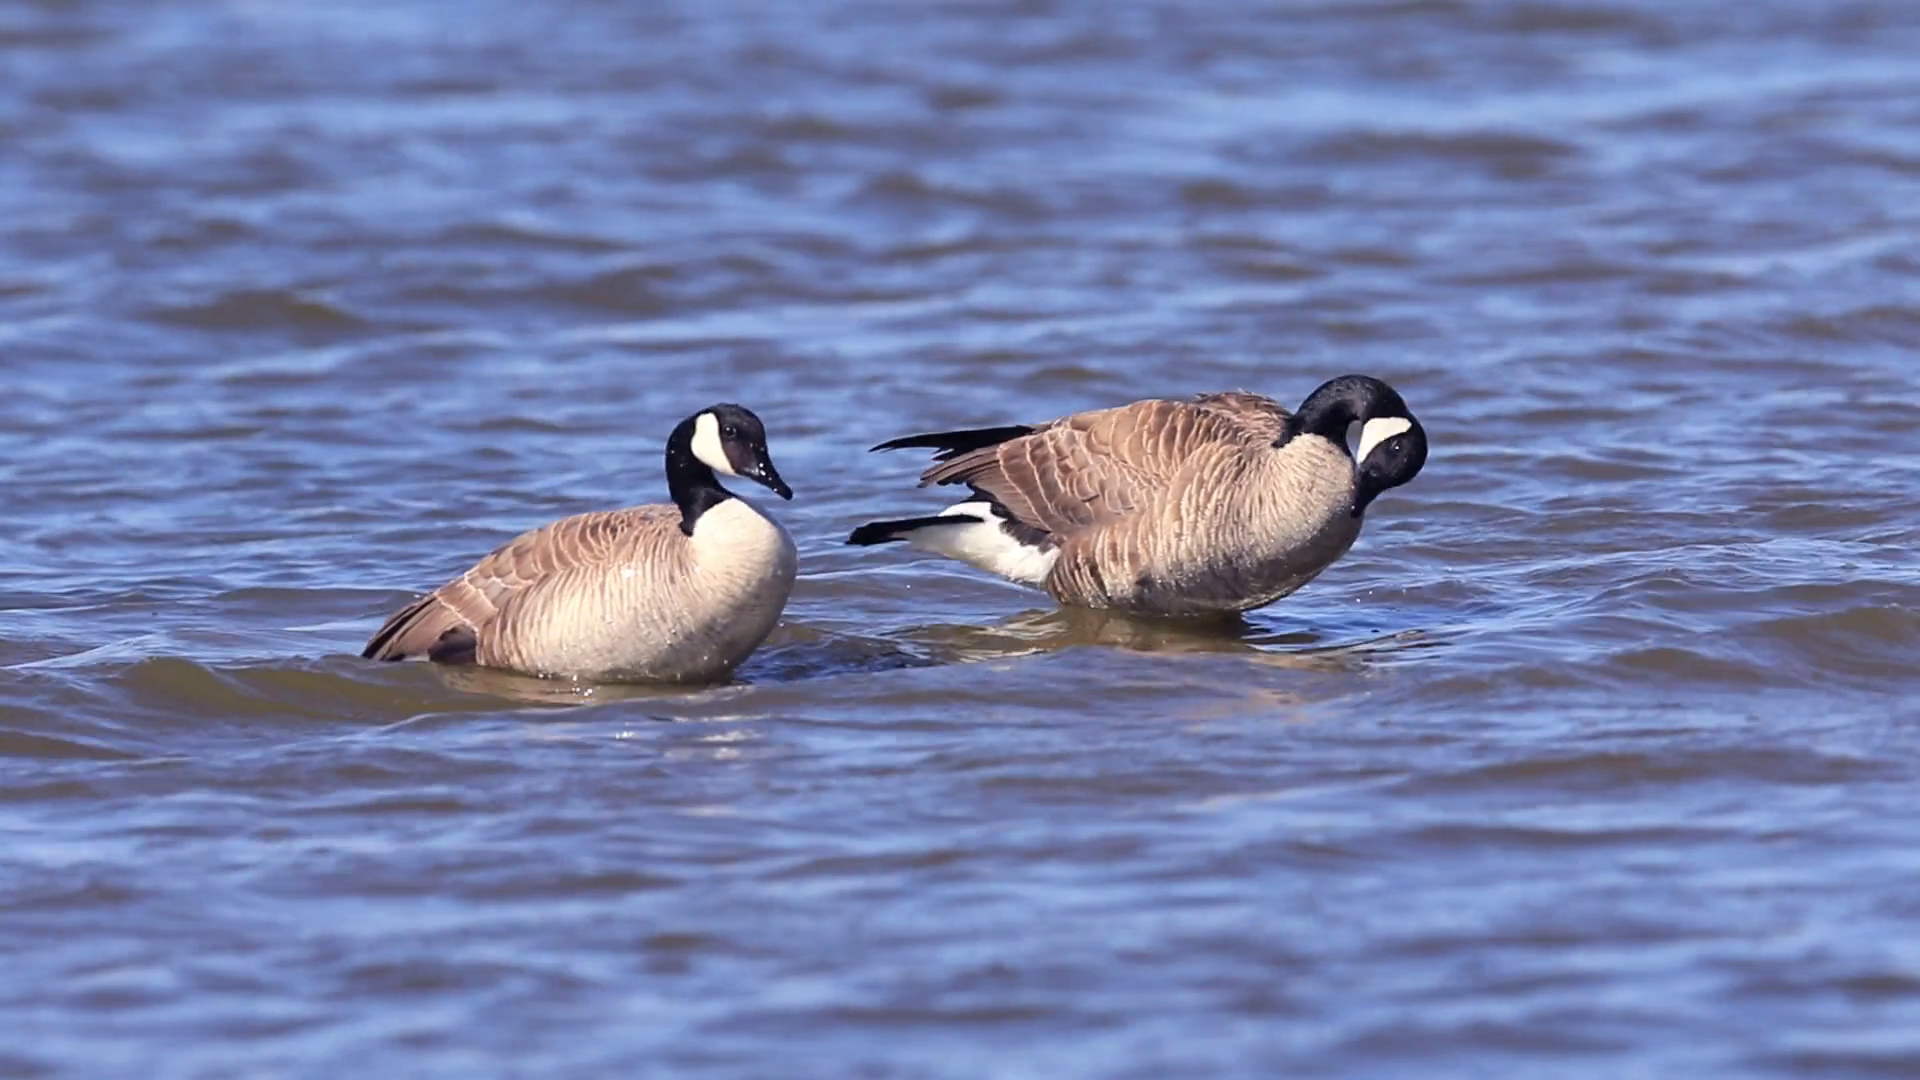 Pair of Canada Geese Washing and Preening Themselves on a Deep Blue ...